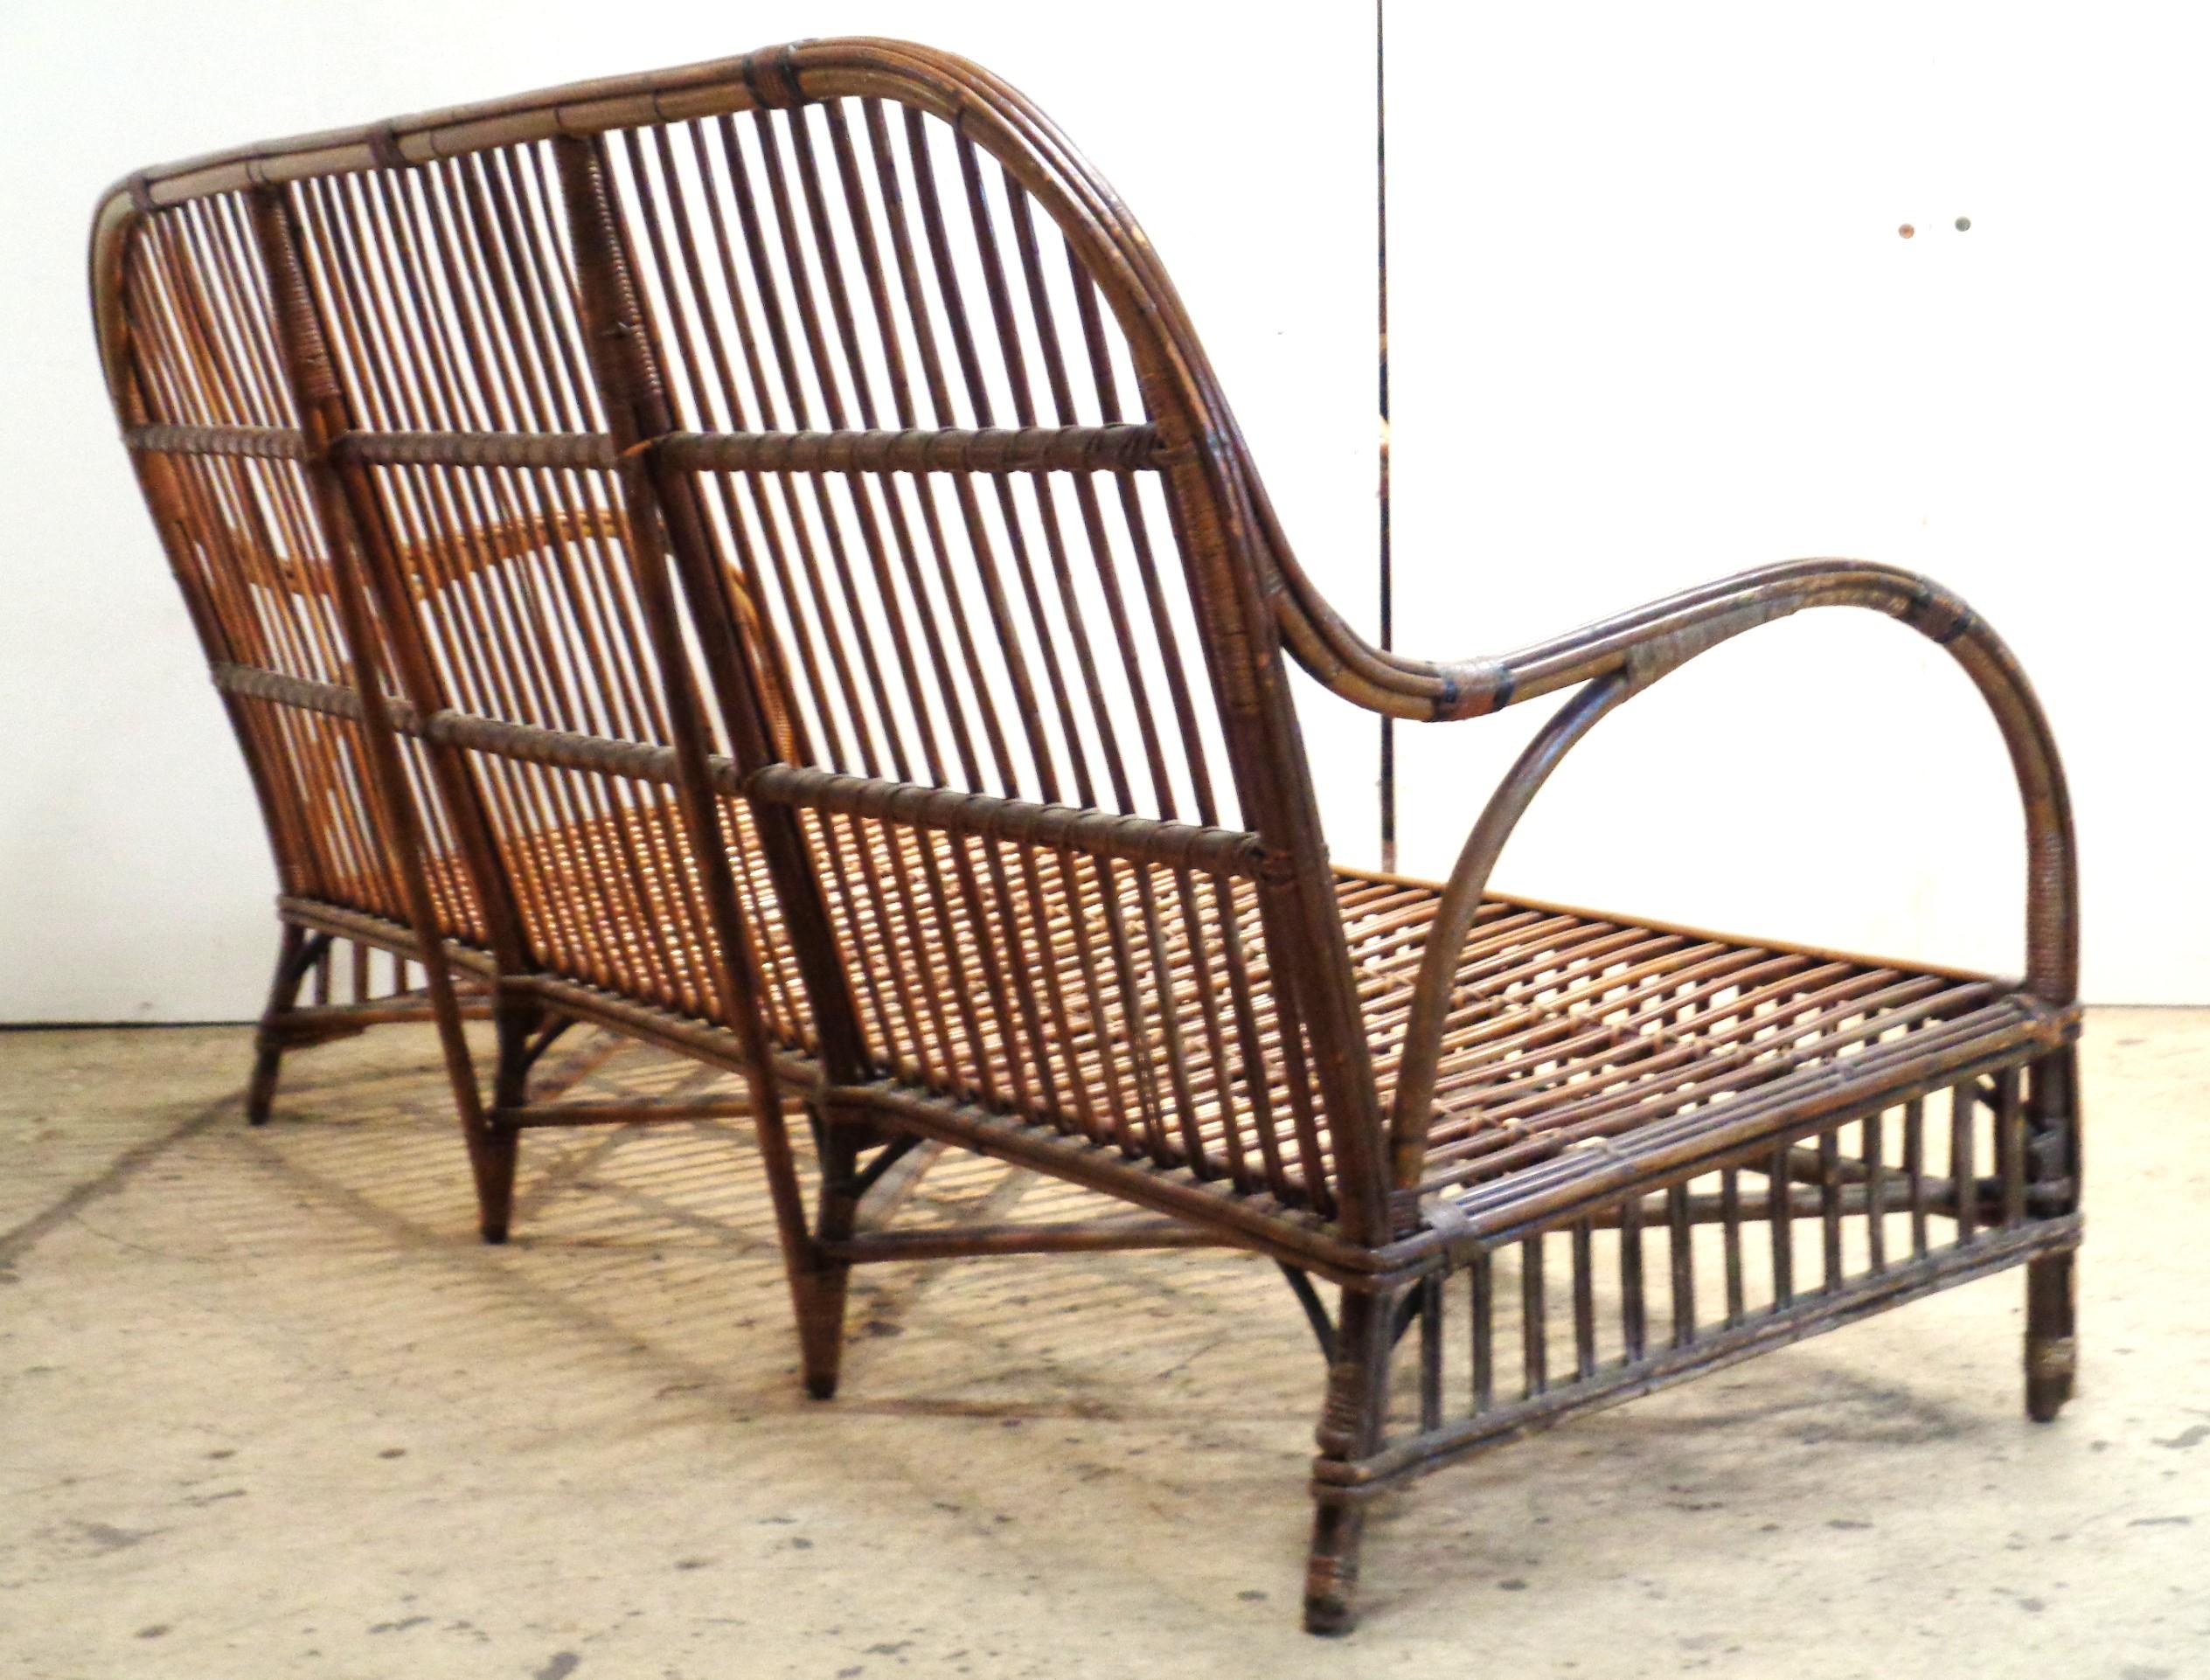 Mid-20th Century American Natural Stick Wicker Settee and Matching Armchair, Circa 1930